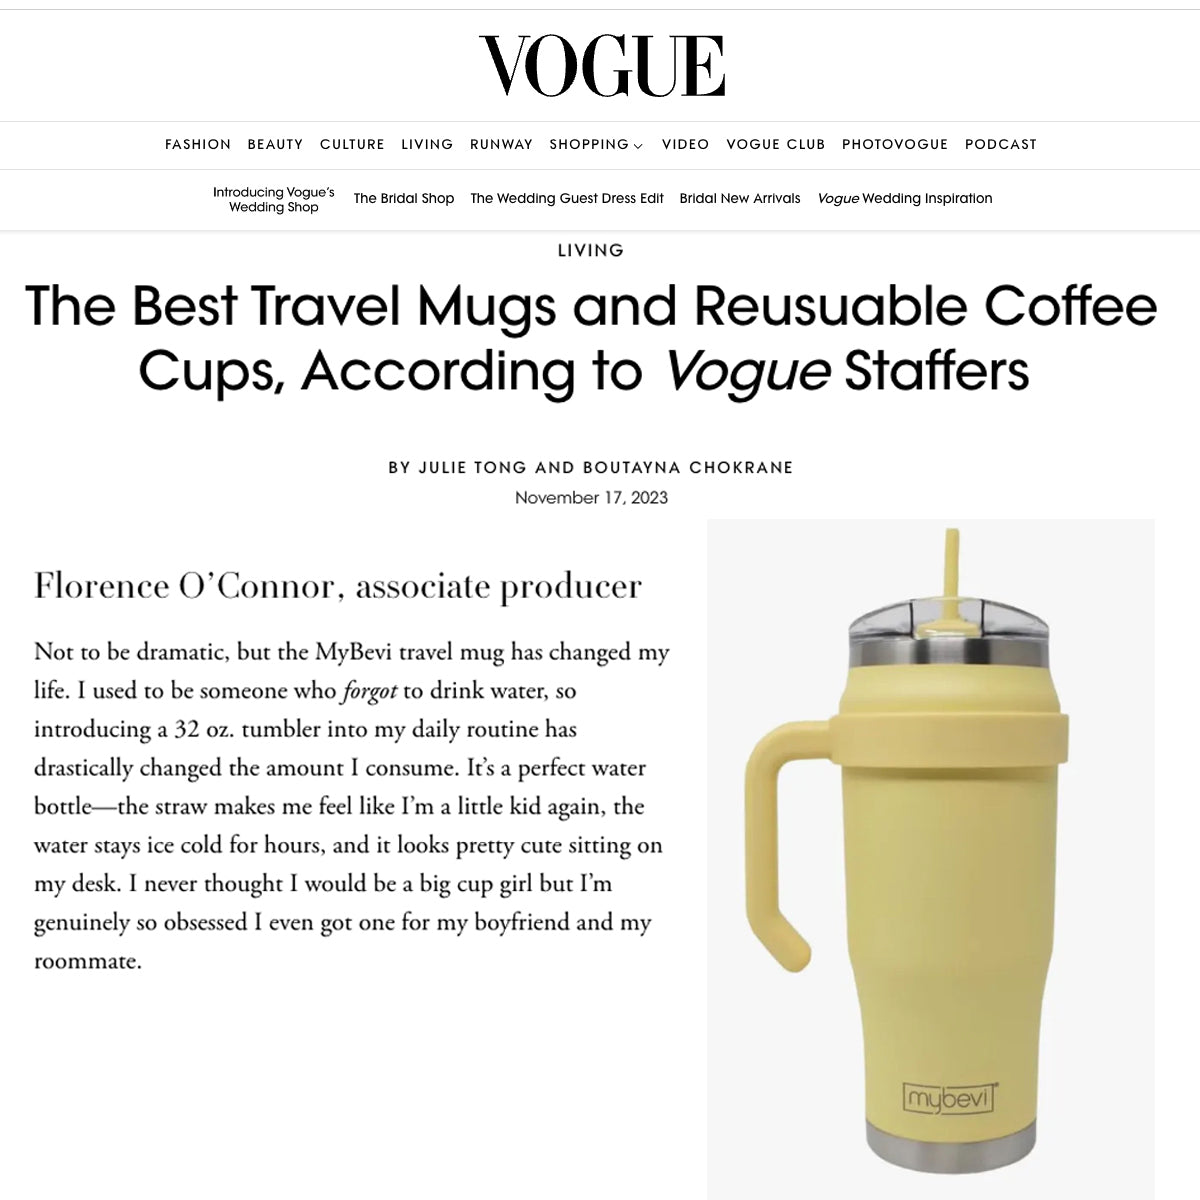 VOGUE taps MyBevi as one of the best travel mugs available!